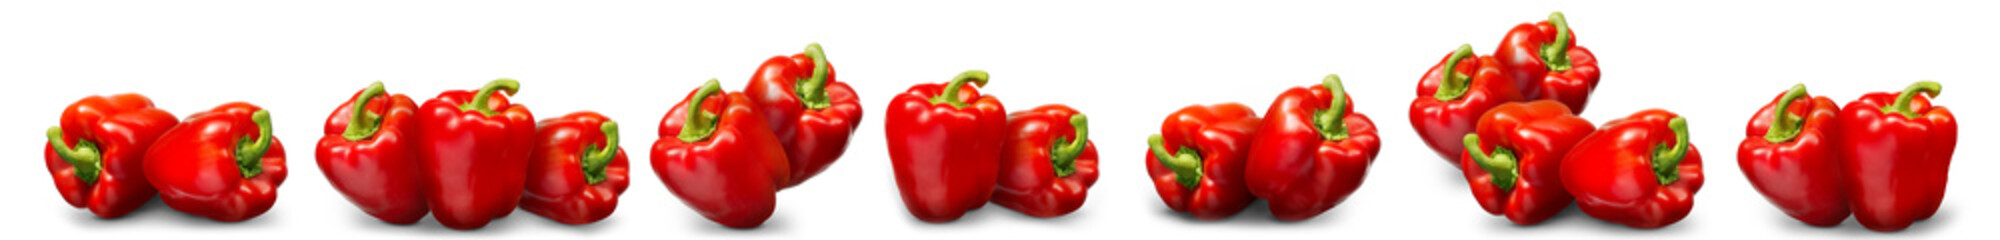 Group of sweet red pepper isolated on white background